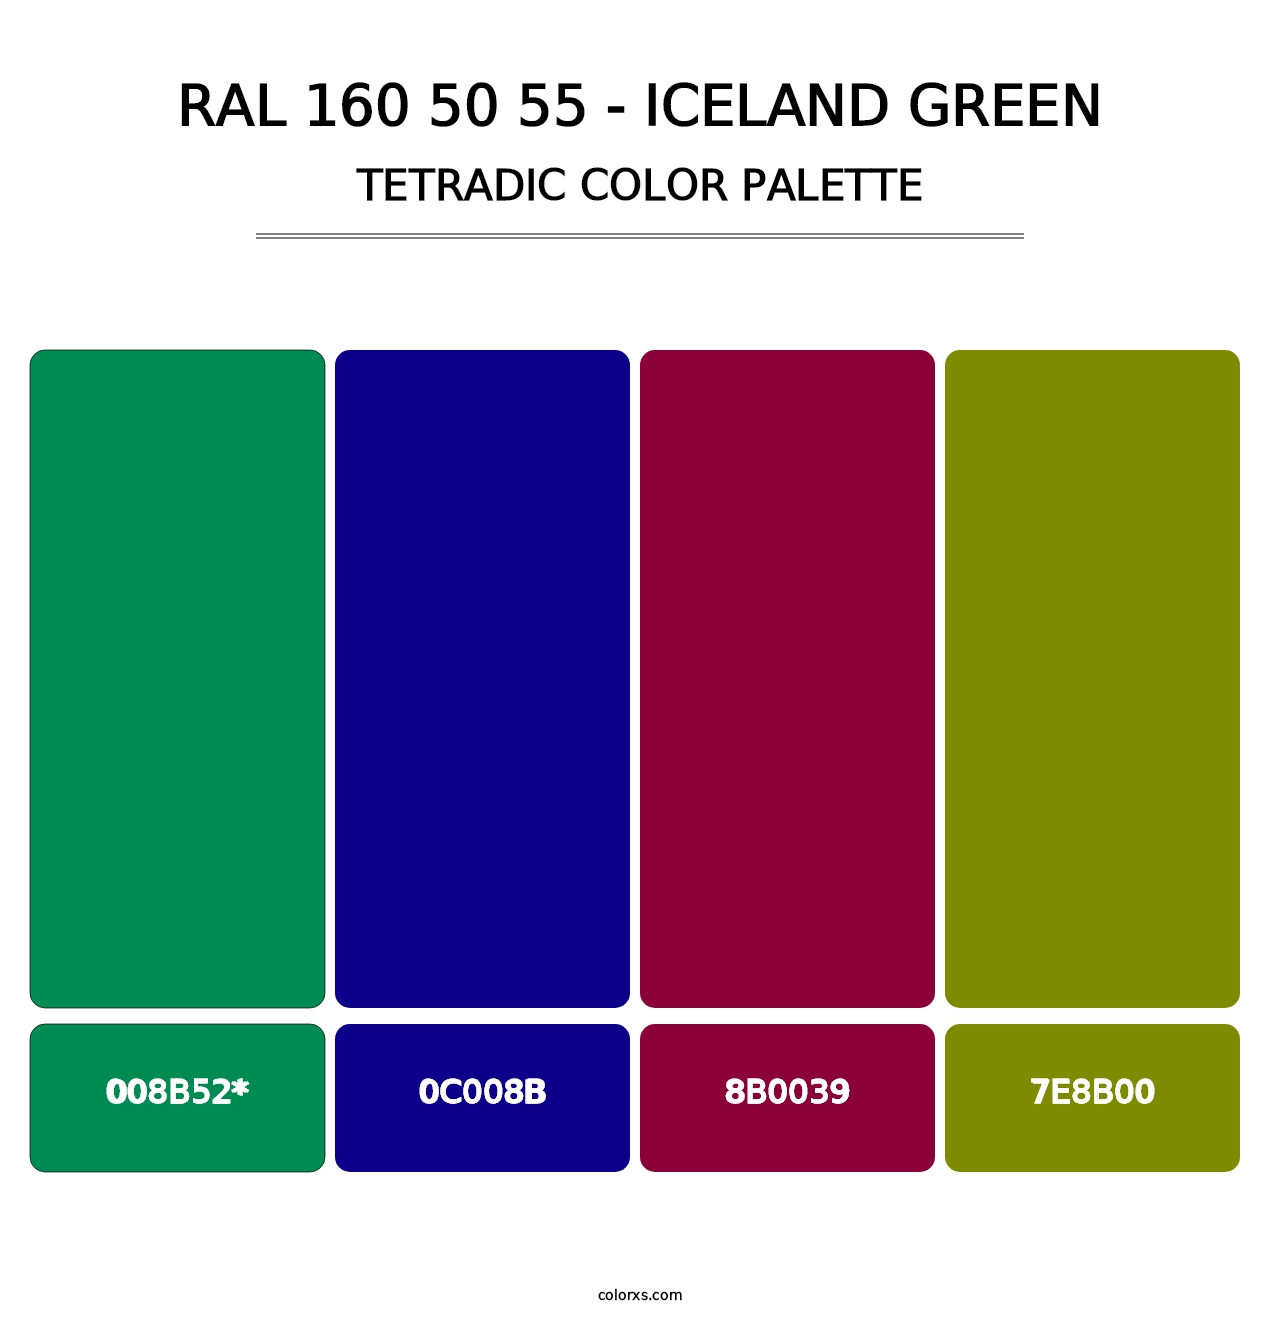 RAL 160 50 55 - Iceland Green - Tetradic Color Palette